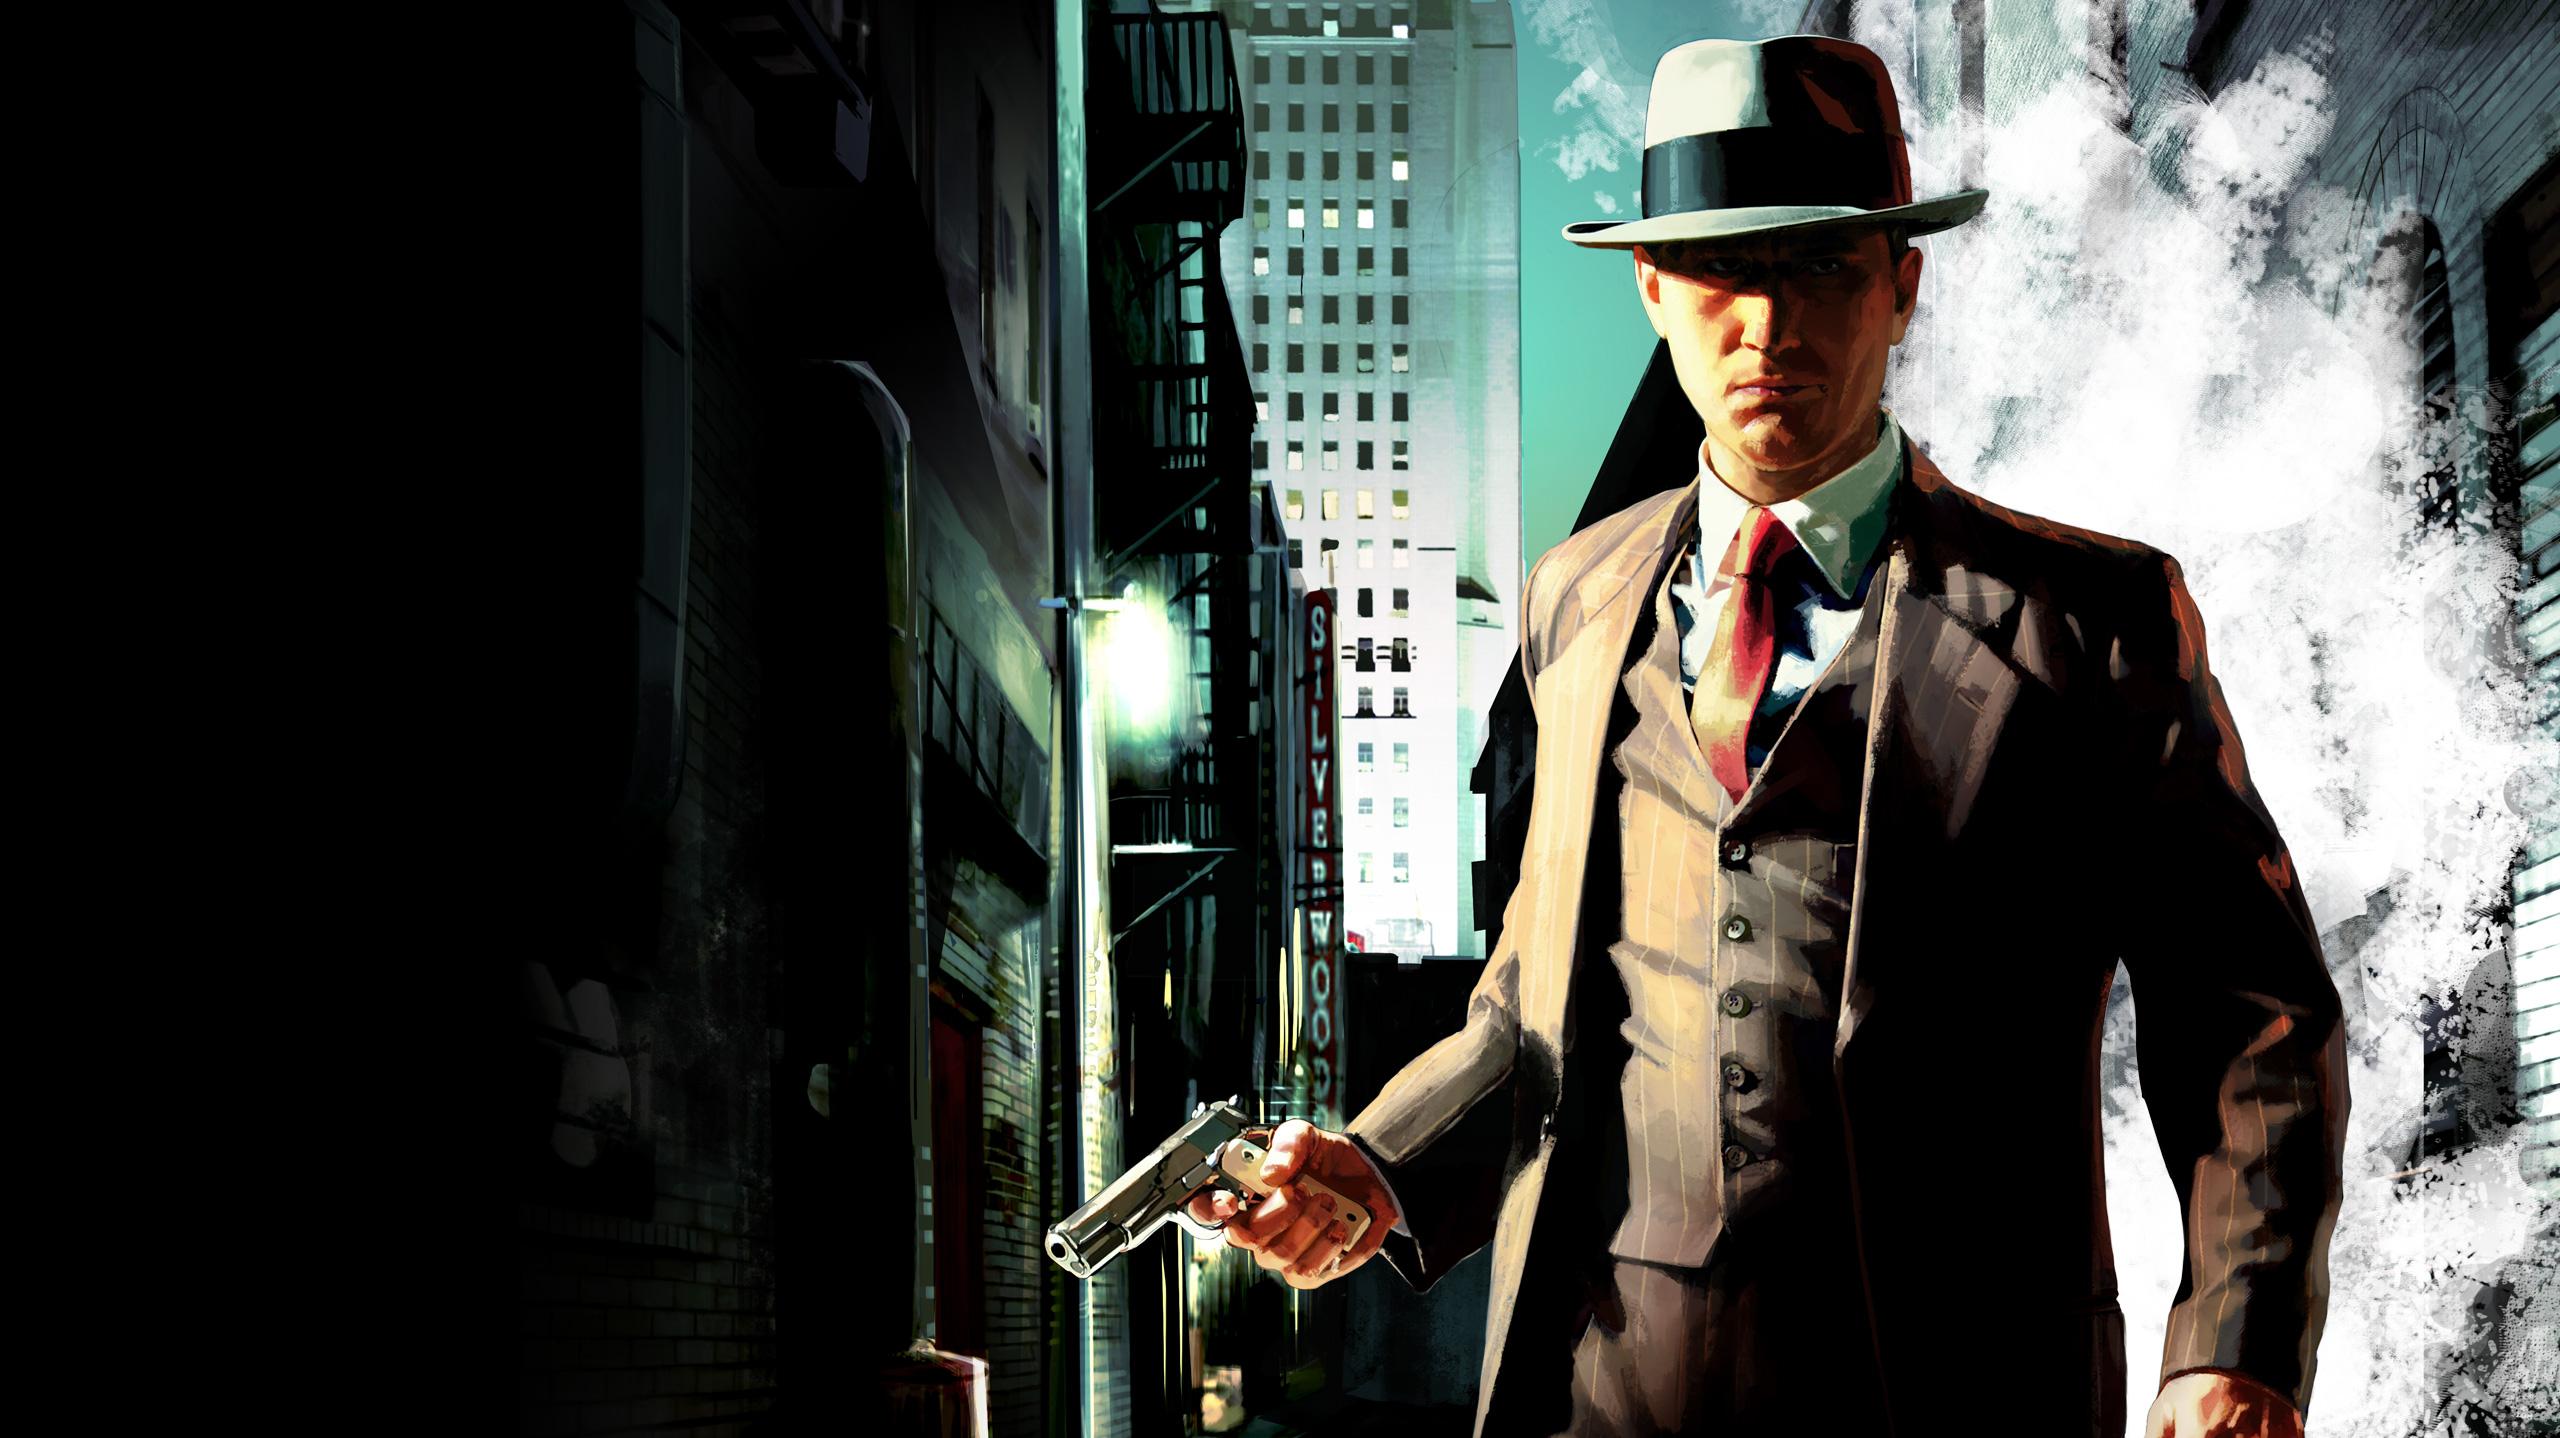 VIRTUOS PARTNERED WITH ROCKSTAR GAMES TO BRING THE ENHANCED VERSION OF L.A. NOIRE ON SWICH, PLAYSTATION 4, XBOX ONE AND VR